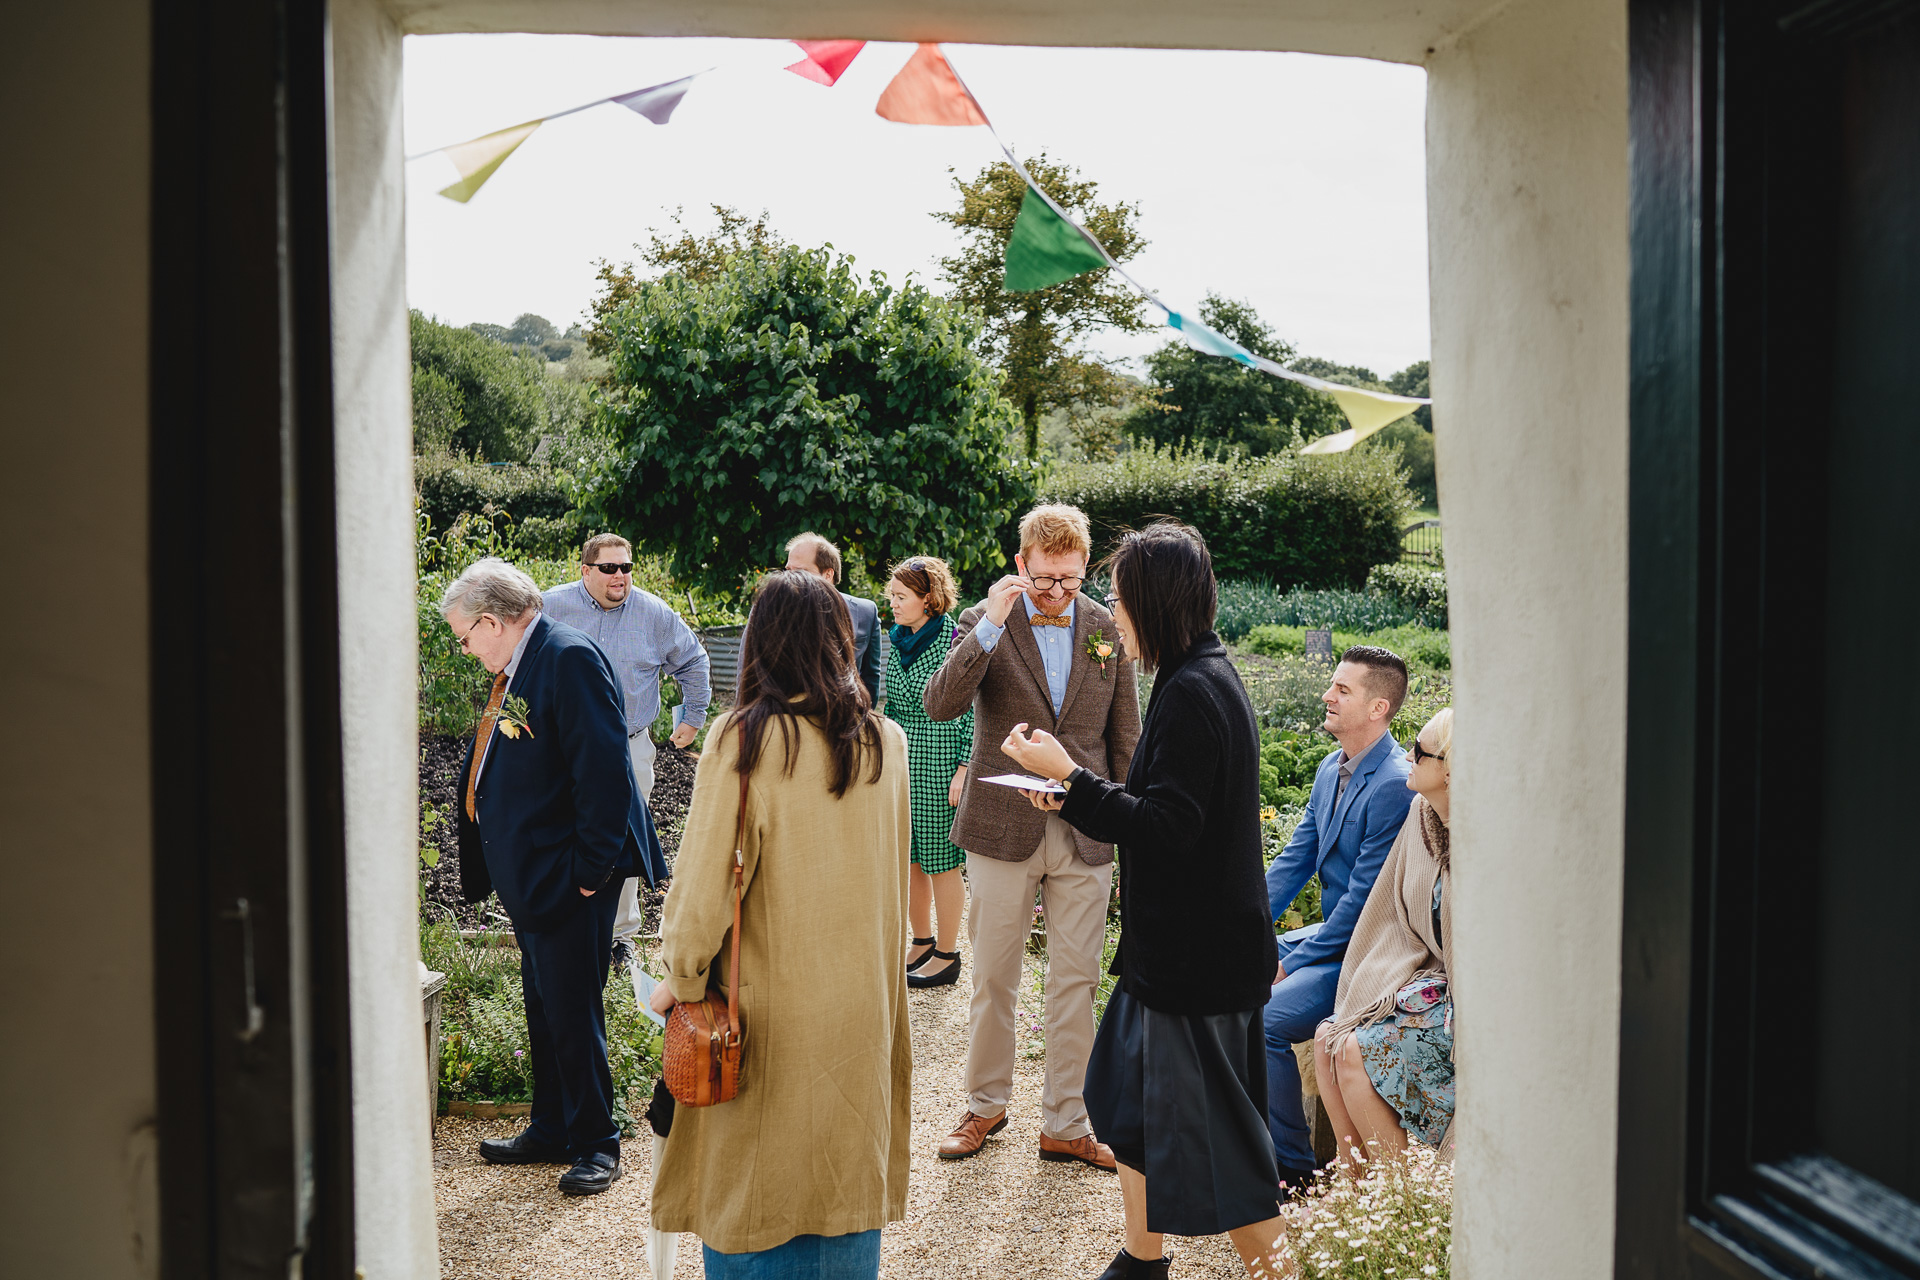 wedding guests outside in a kitchen garden, preparing for an autumn outdoor wedding ceremony